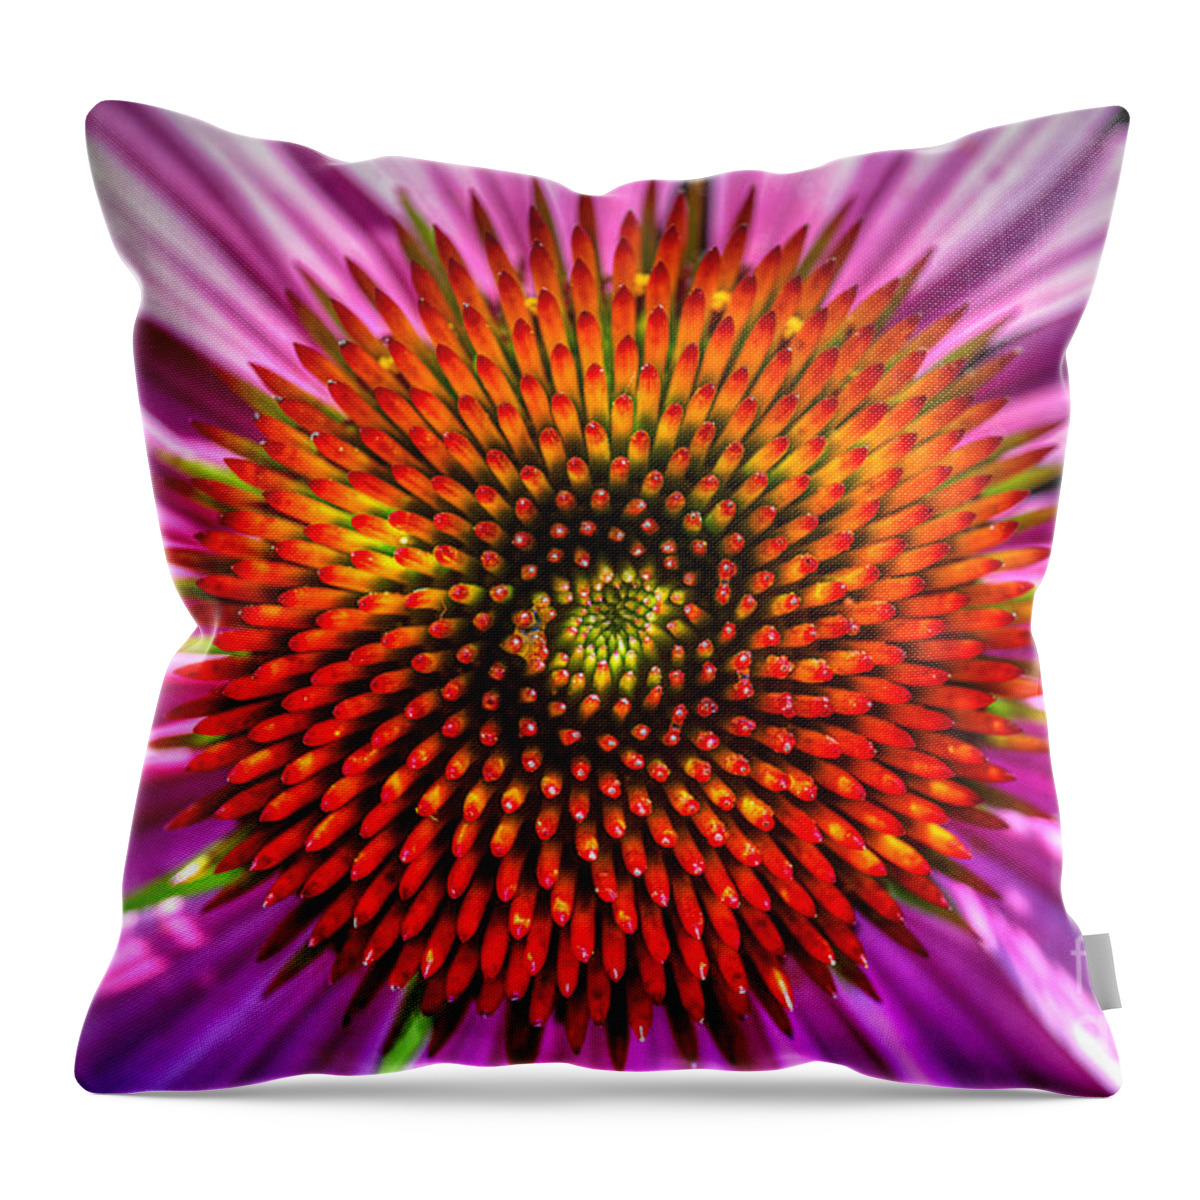 Pink Coneflower Throw Pillow featuring the photograph Top Of The Coneflower by Michael Eingle